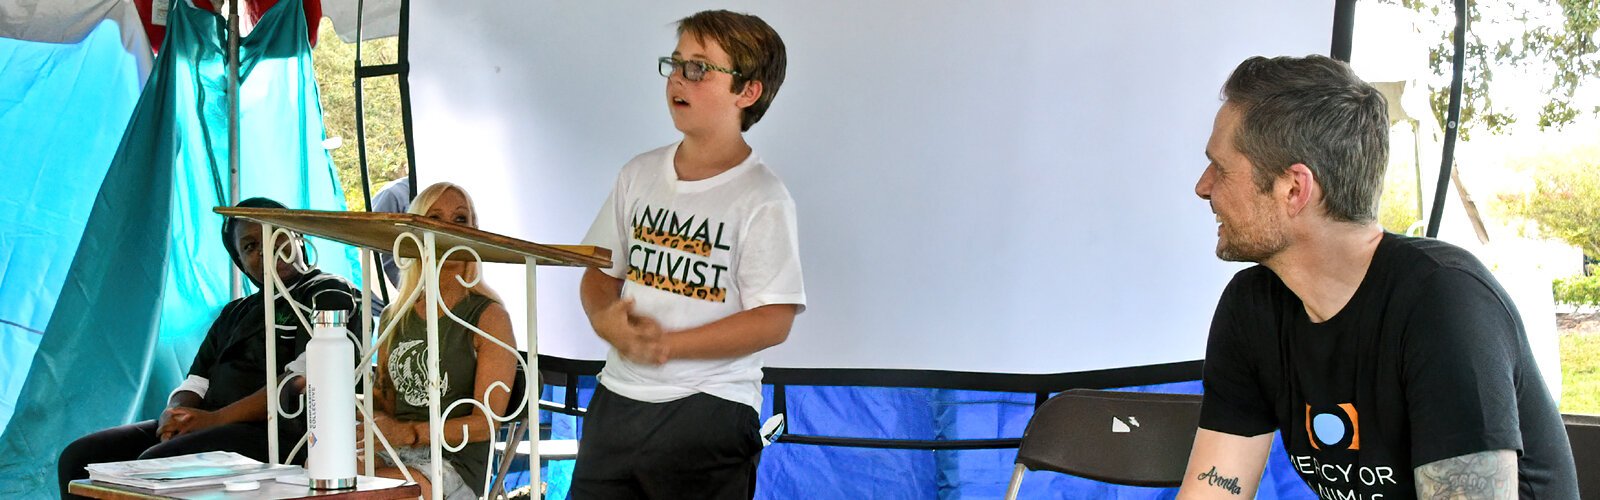 Speaking at an animal rights panel, animal activist Vegan Evan explains why he’s been vegan since age 5. Panelists included Chef Zen Paul, vegan activist Traci Lipton and Mikael Roldsgaard Nielsen of Mercy For Animals.